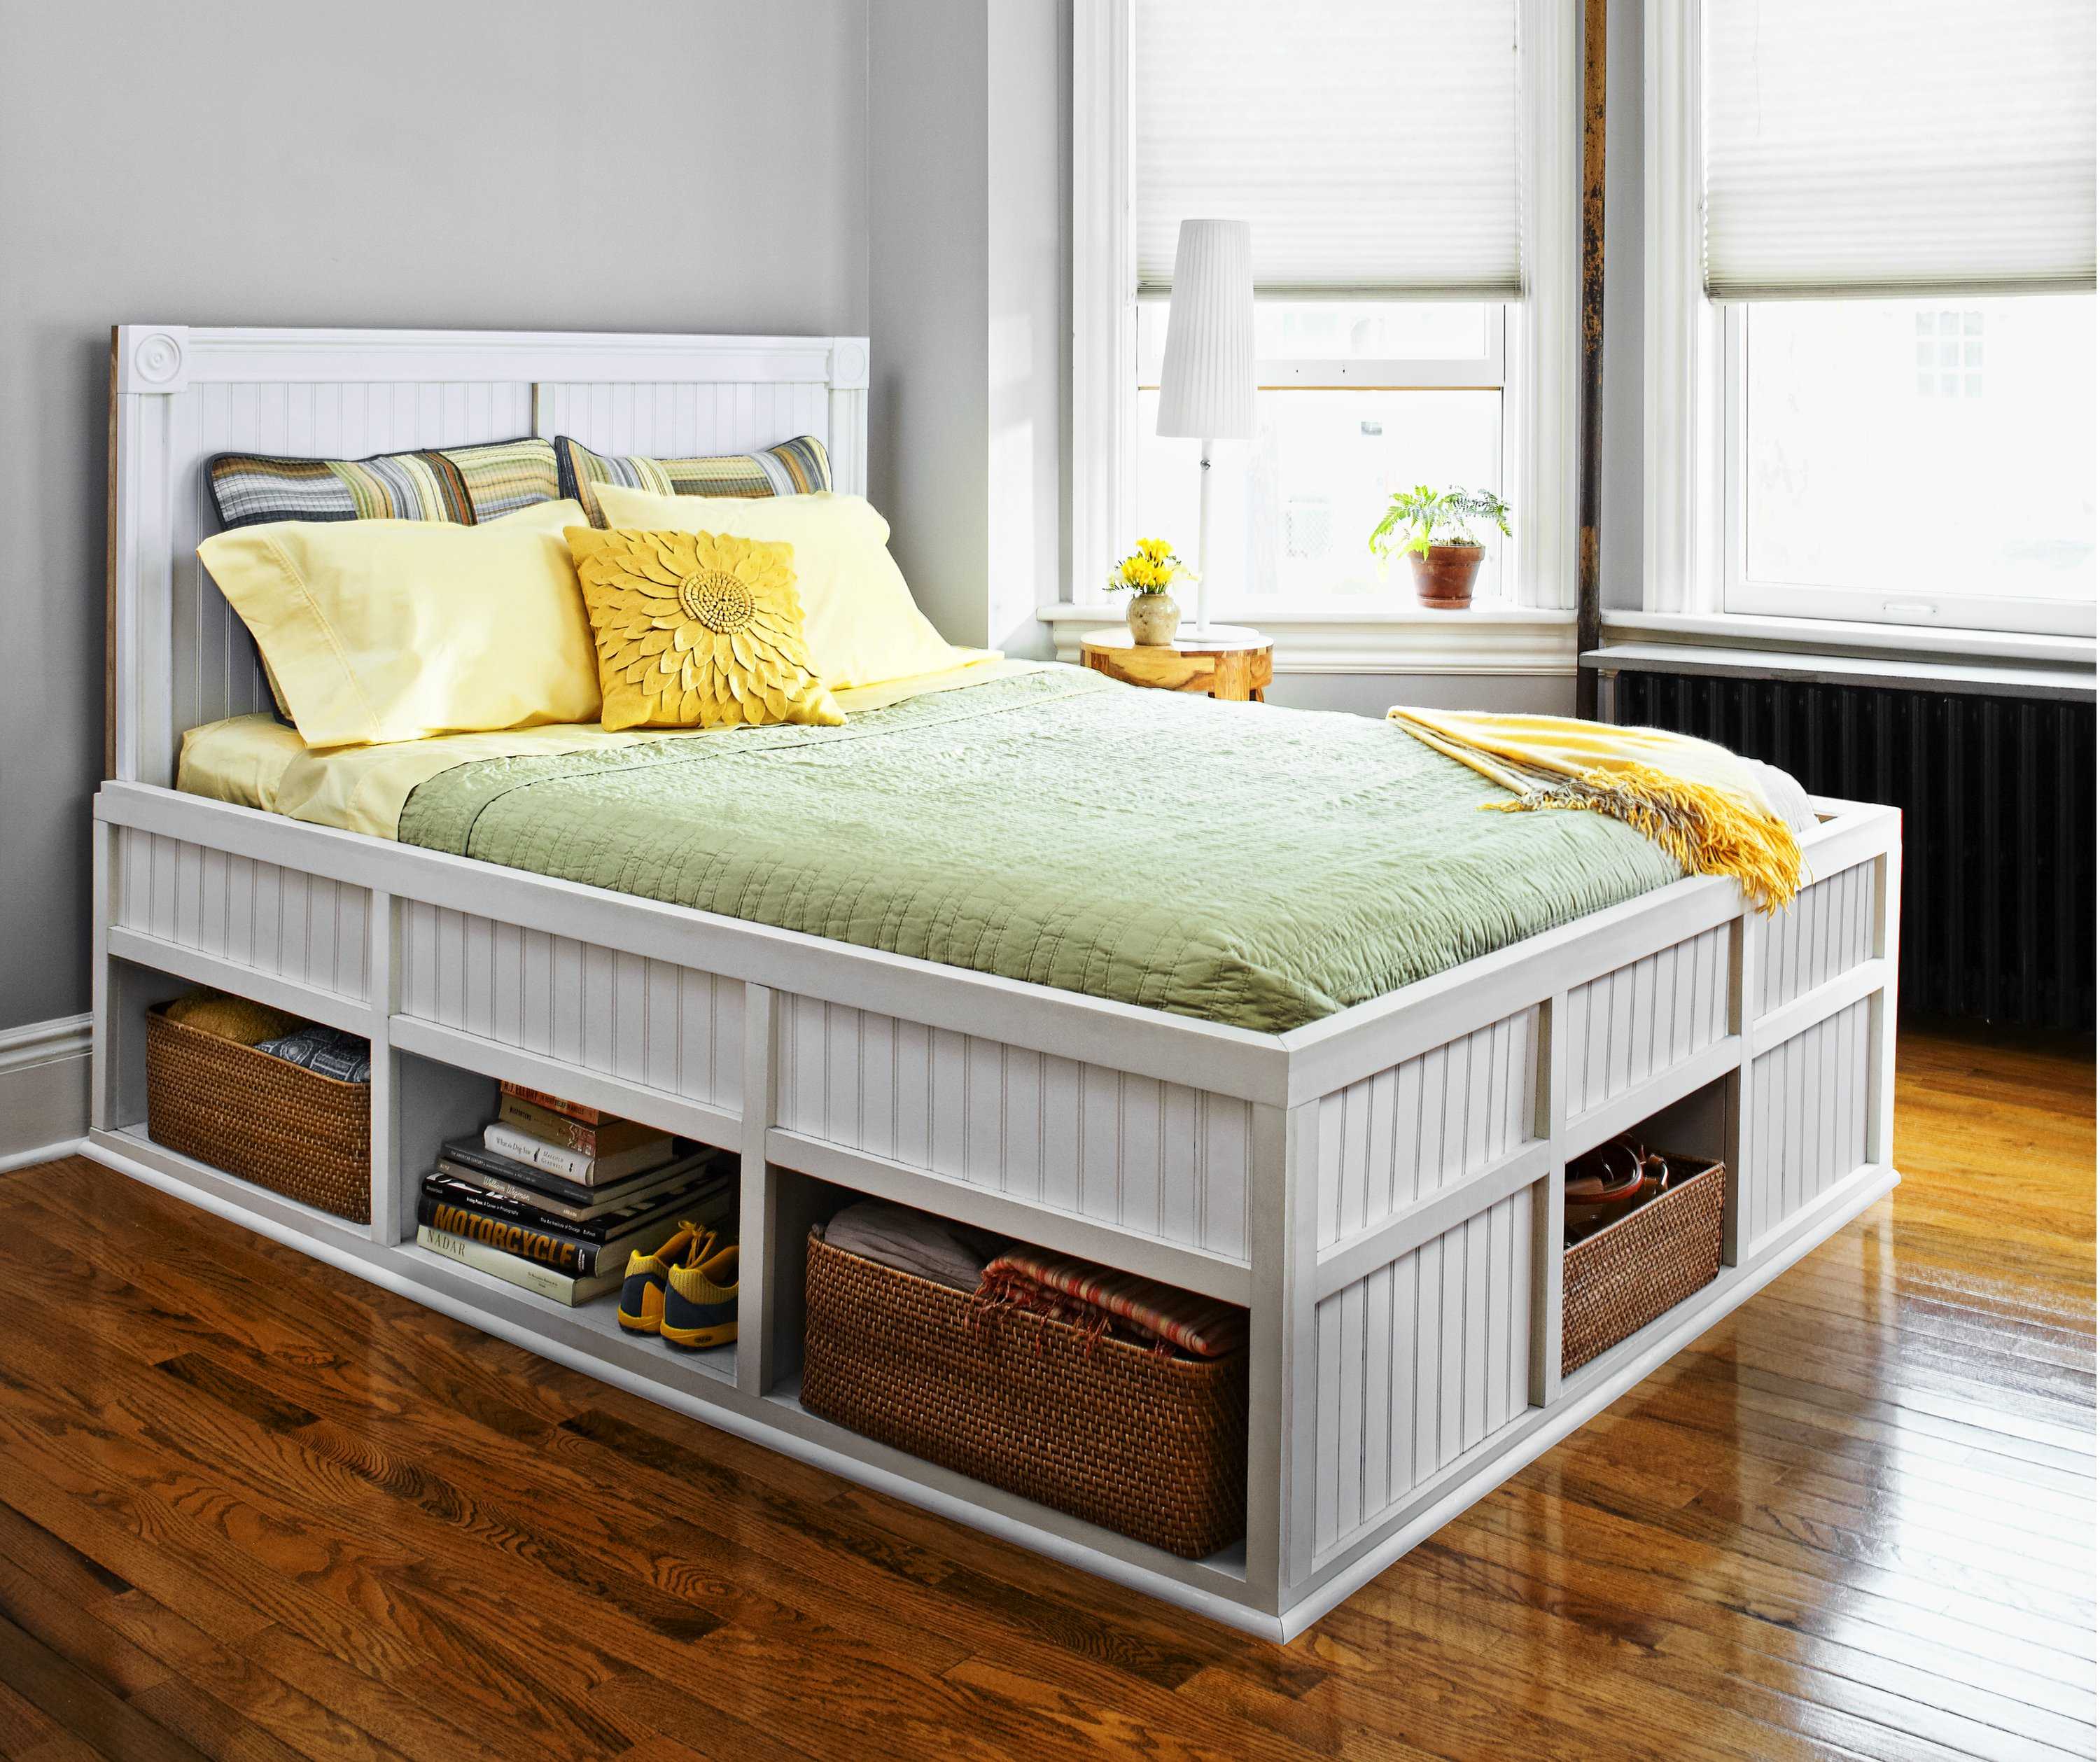 queen size platform bed frame with storage queen size platform frame storage inspirations also awesome bed with KRDIFKG